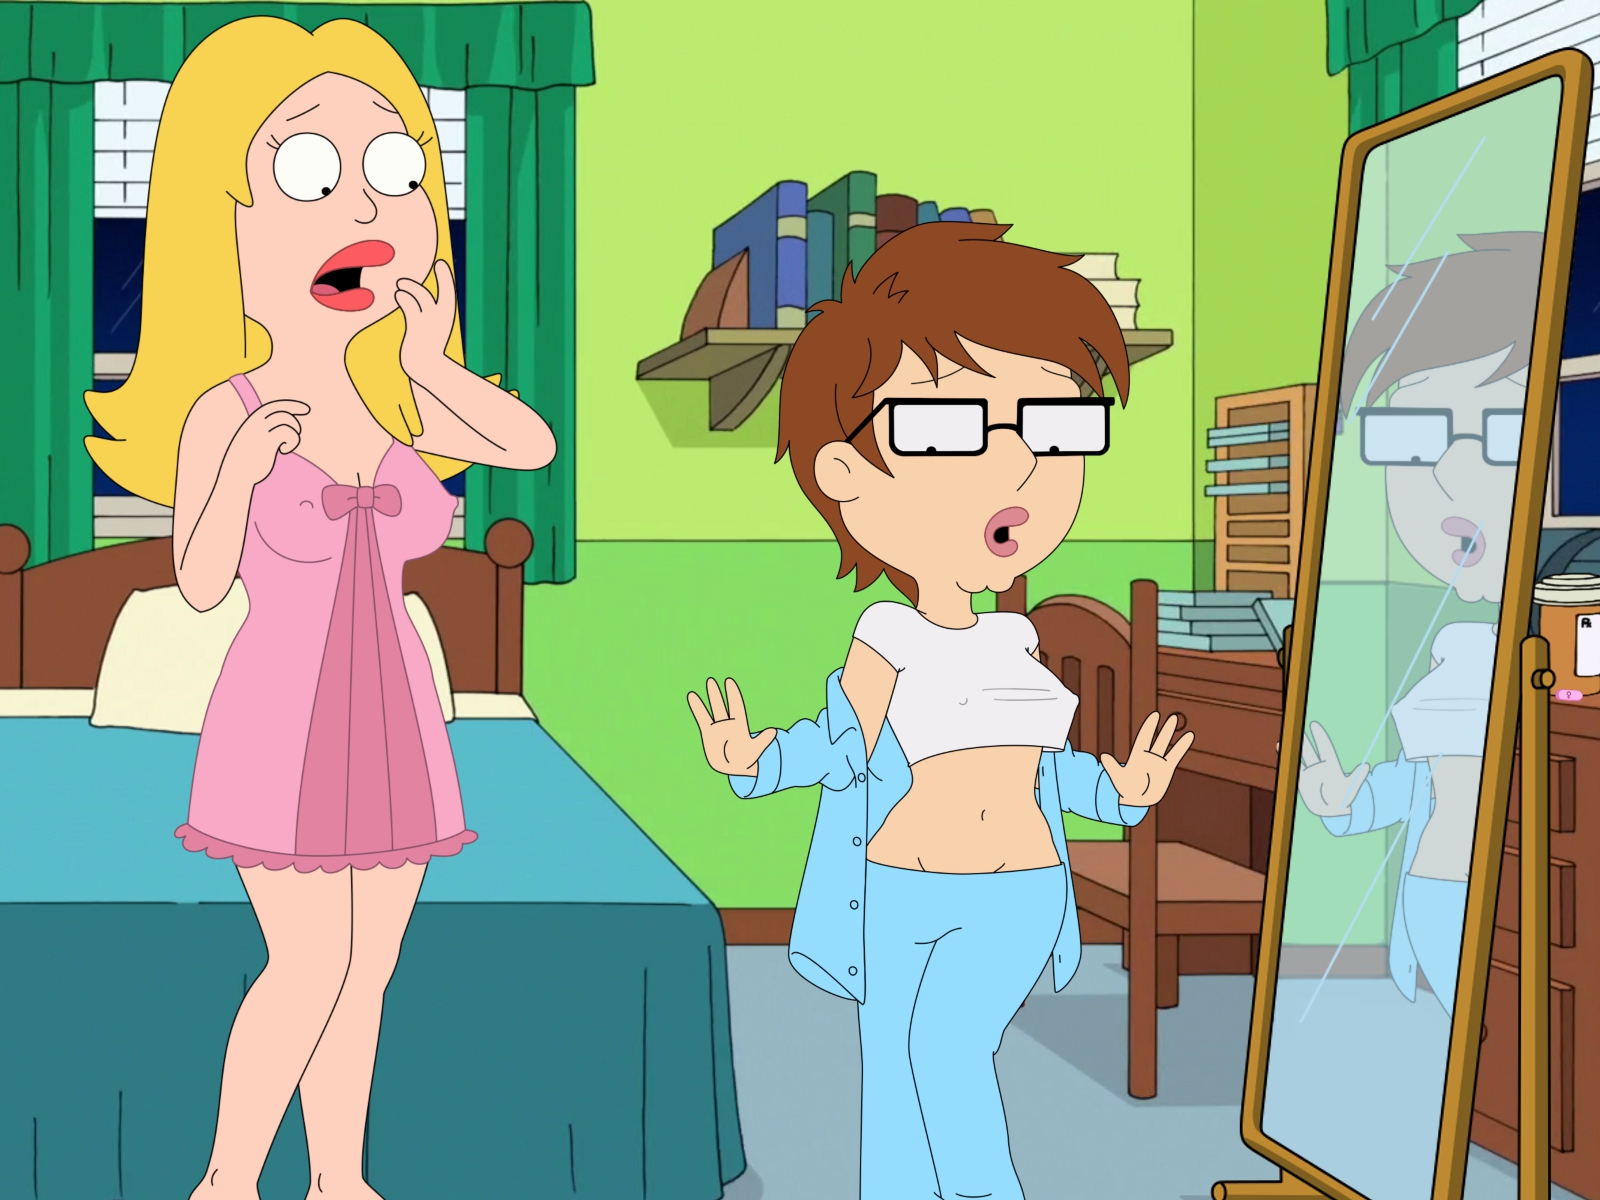 American dad gets rid of andy dick